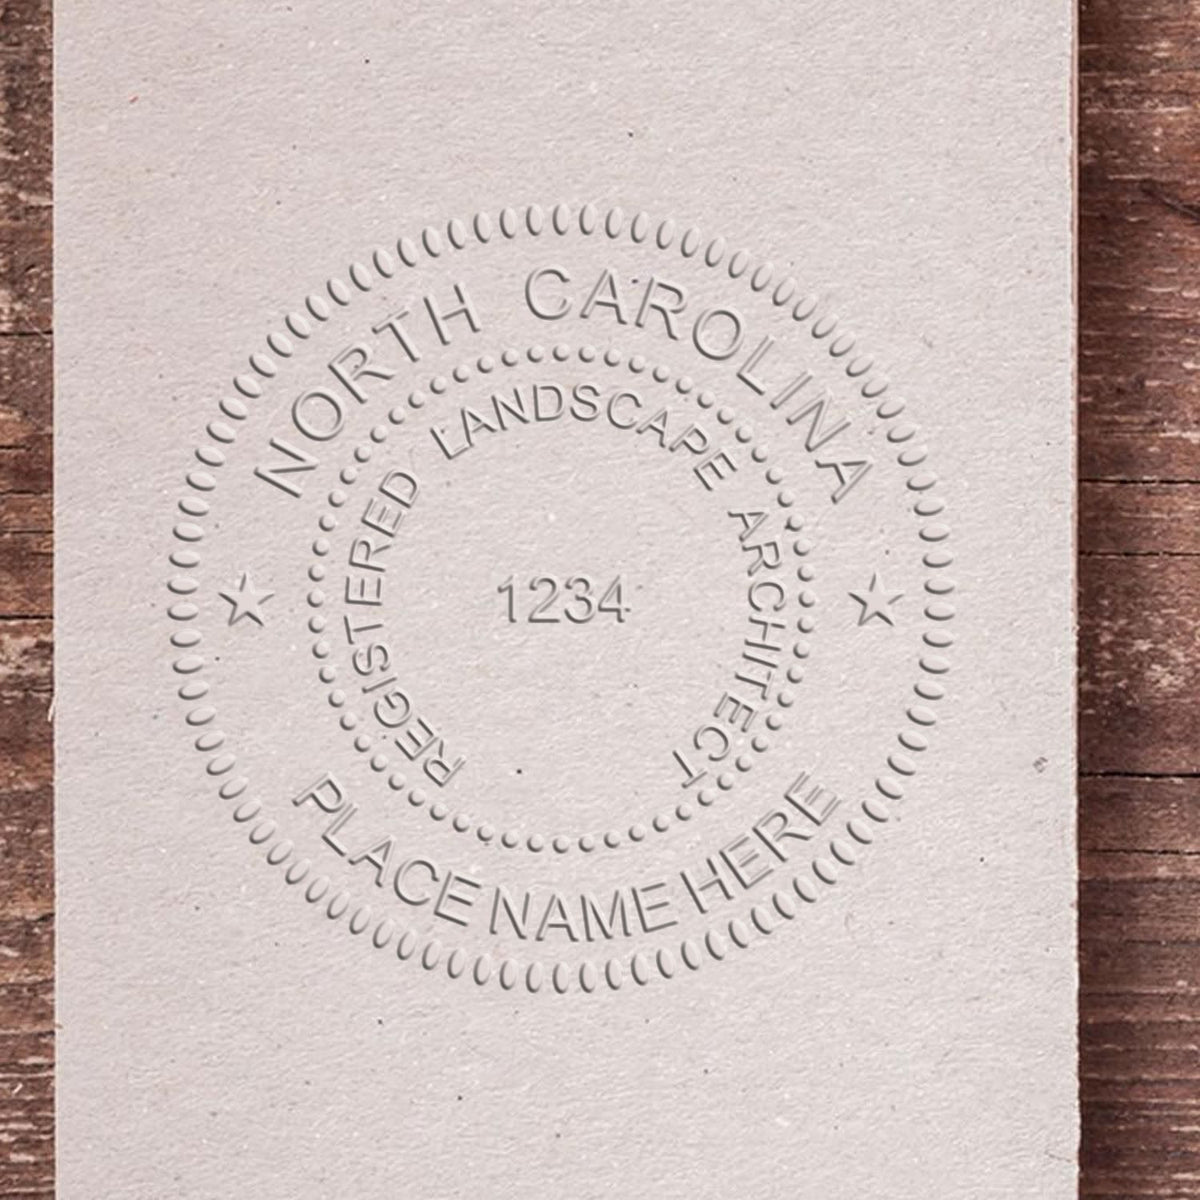 A photograph of the Hybrid North Carolina Landscape Architect Seal stamp impression reveals a vivid, professional image of the on paper.